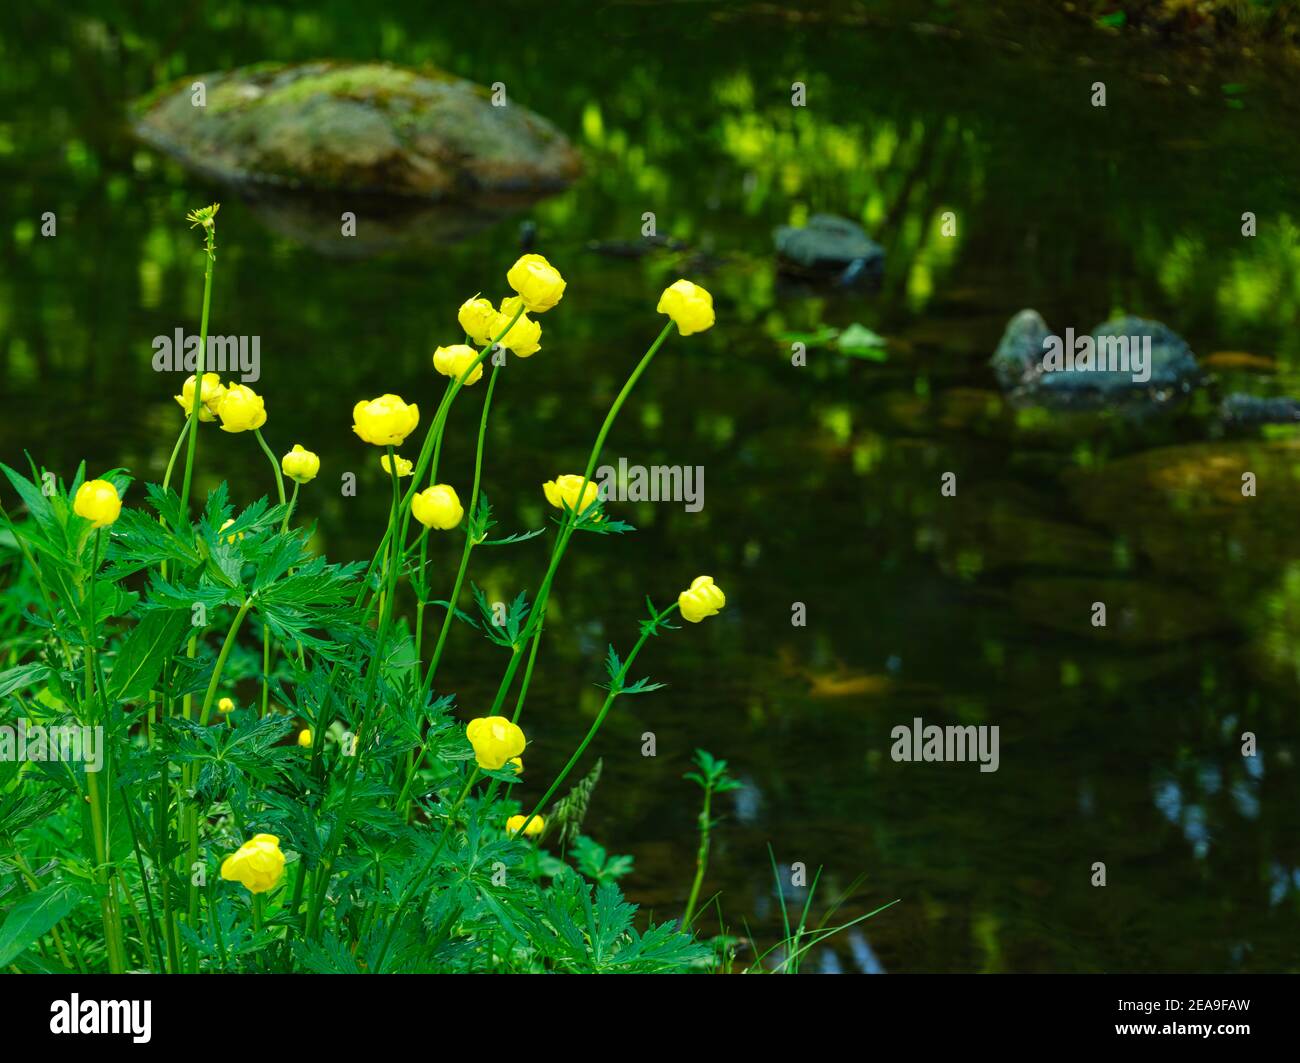 Europe, Germany, Hesse, Marburg, Botanical Garden of the Philipps University on the Lahn Mountains, Globeflowers (Trollius europaeus) at the stream in the spring forest Stock Photo